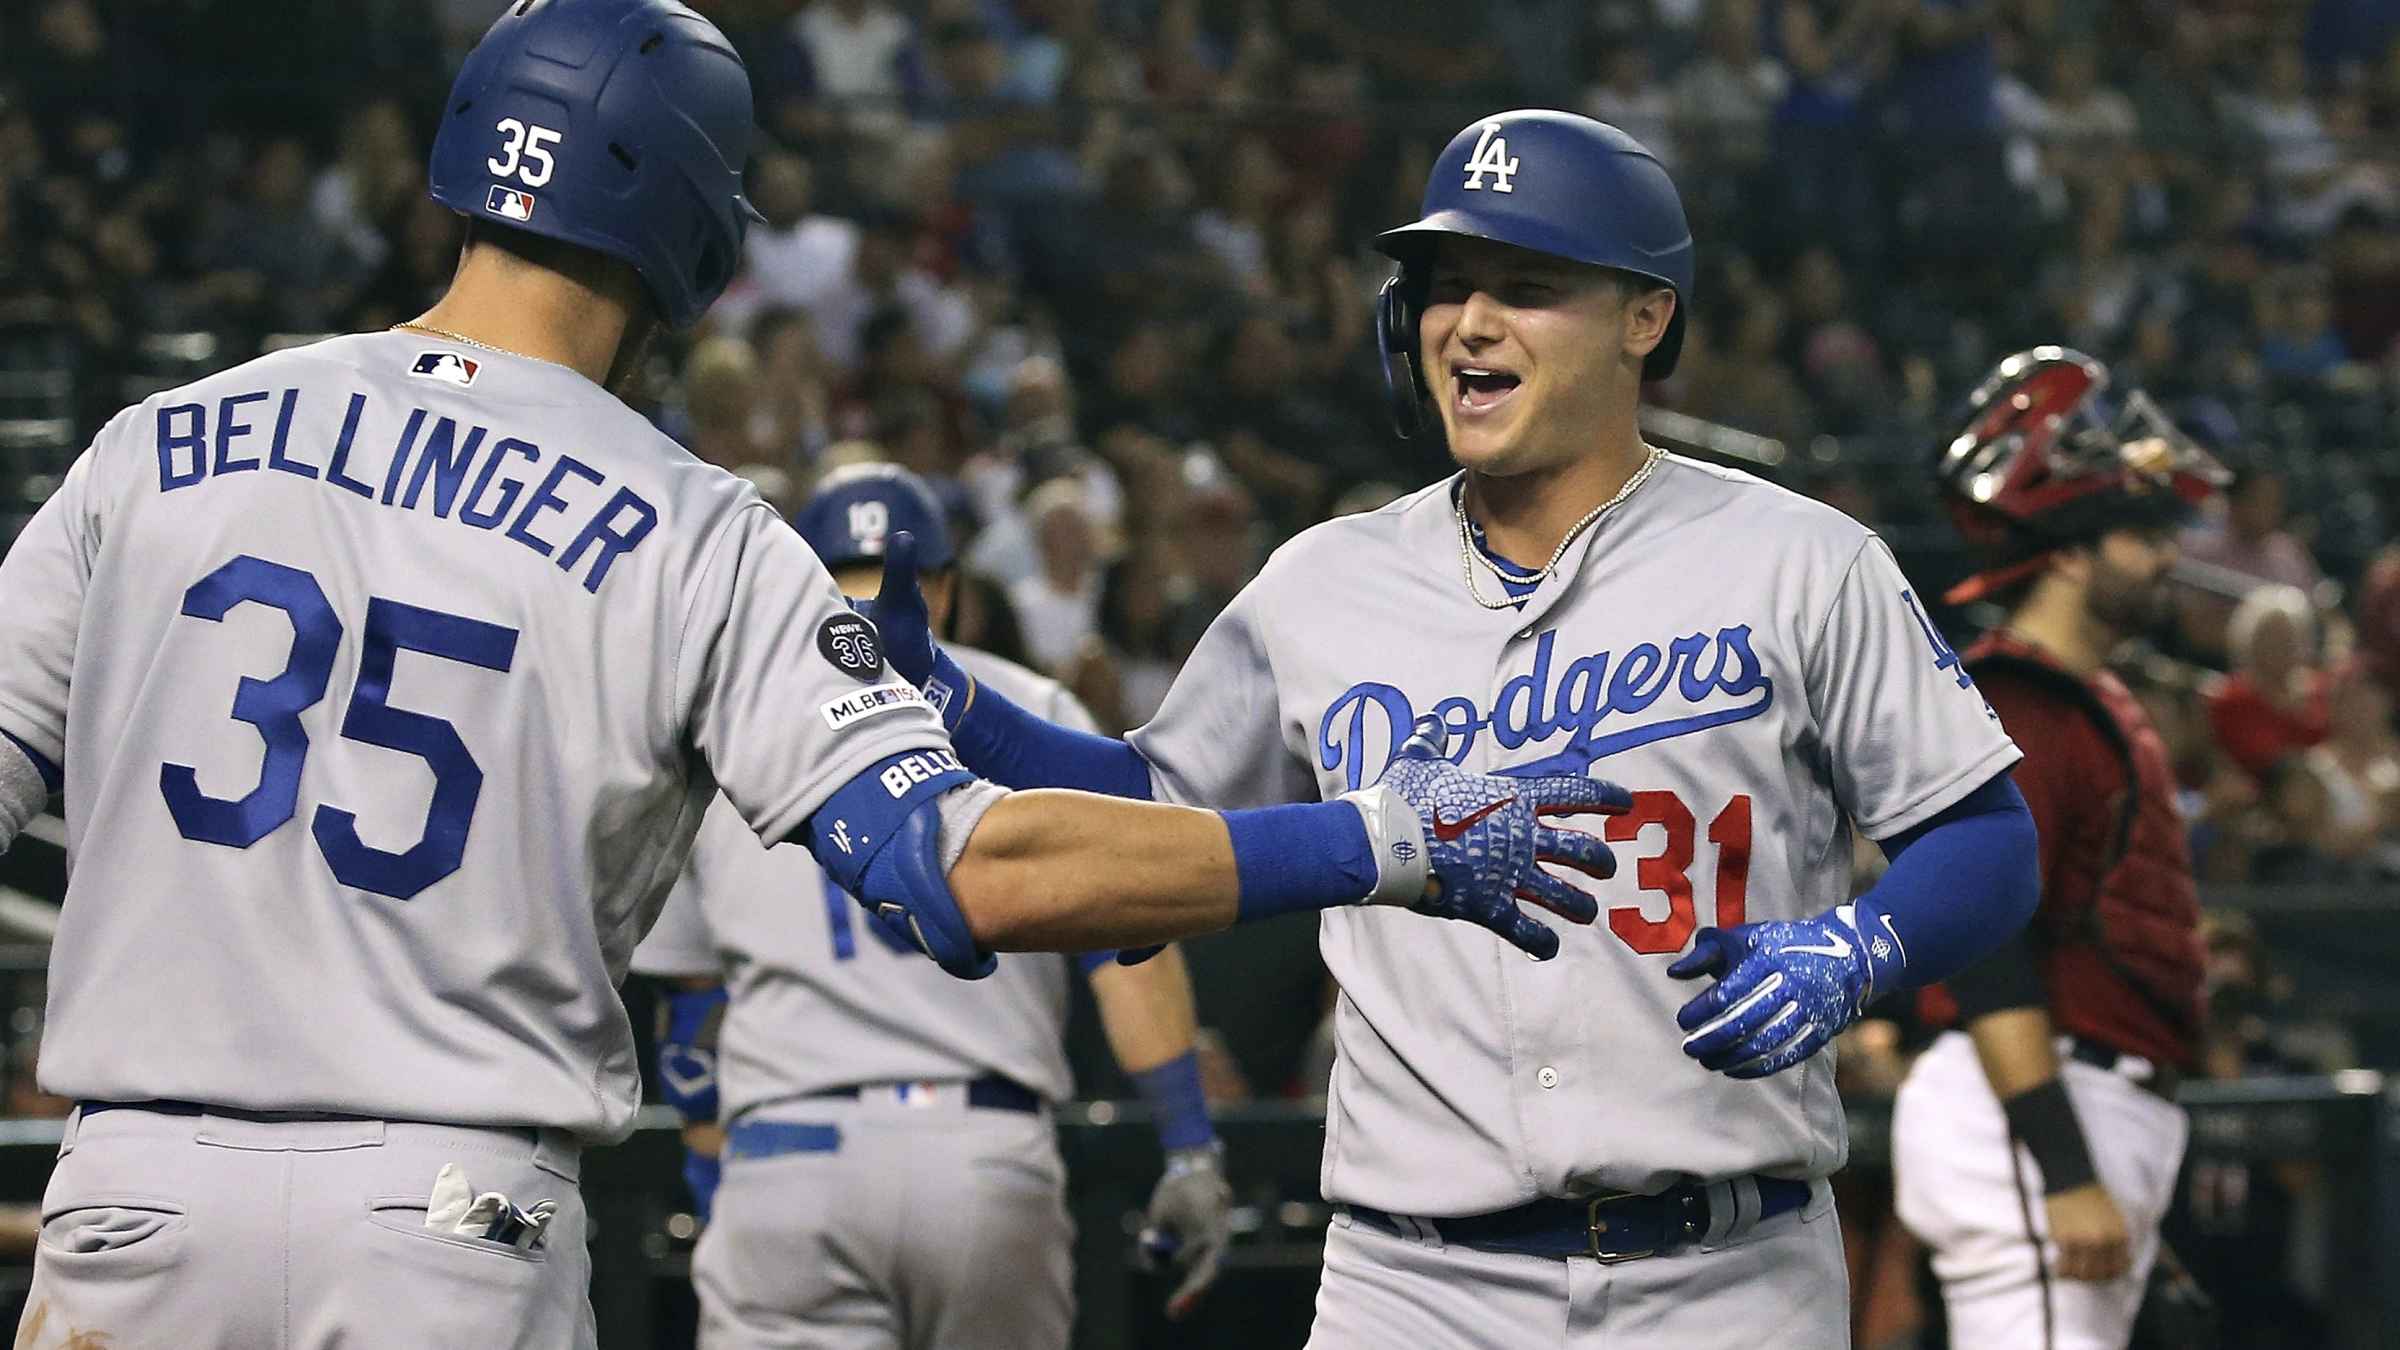 MLB scores: Dodgers clinch NL West title with 4-3 win over Rockies